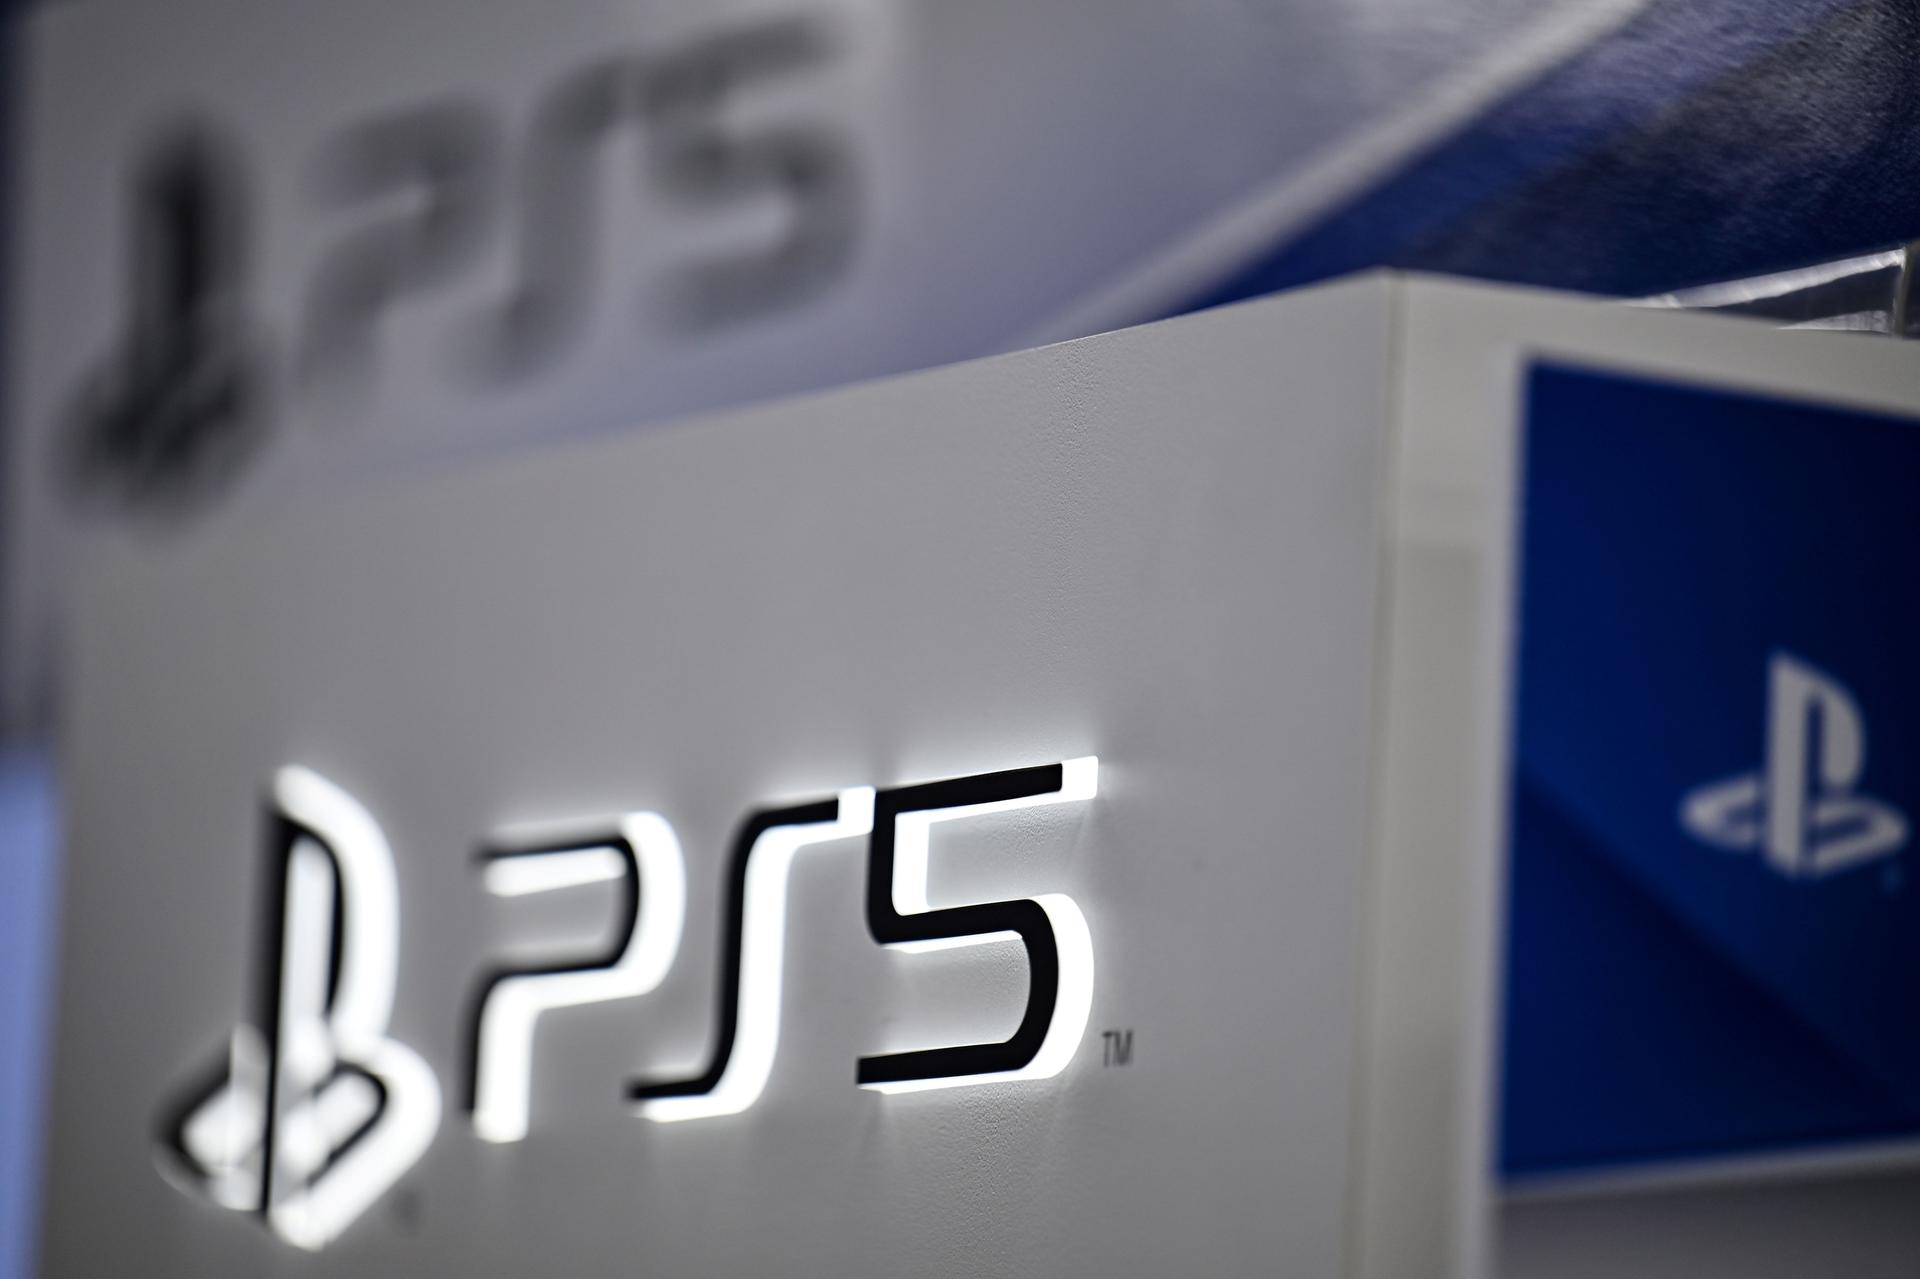 Parents and gamers frustrated as PS5 and Xbox stock sells out